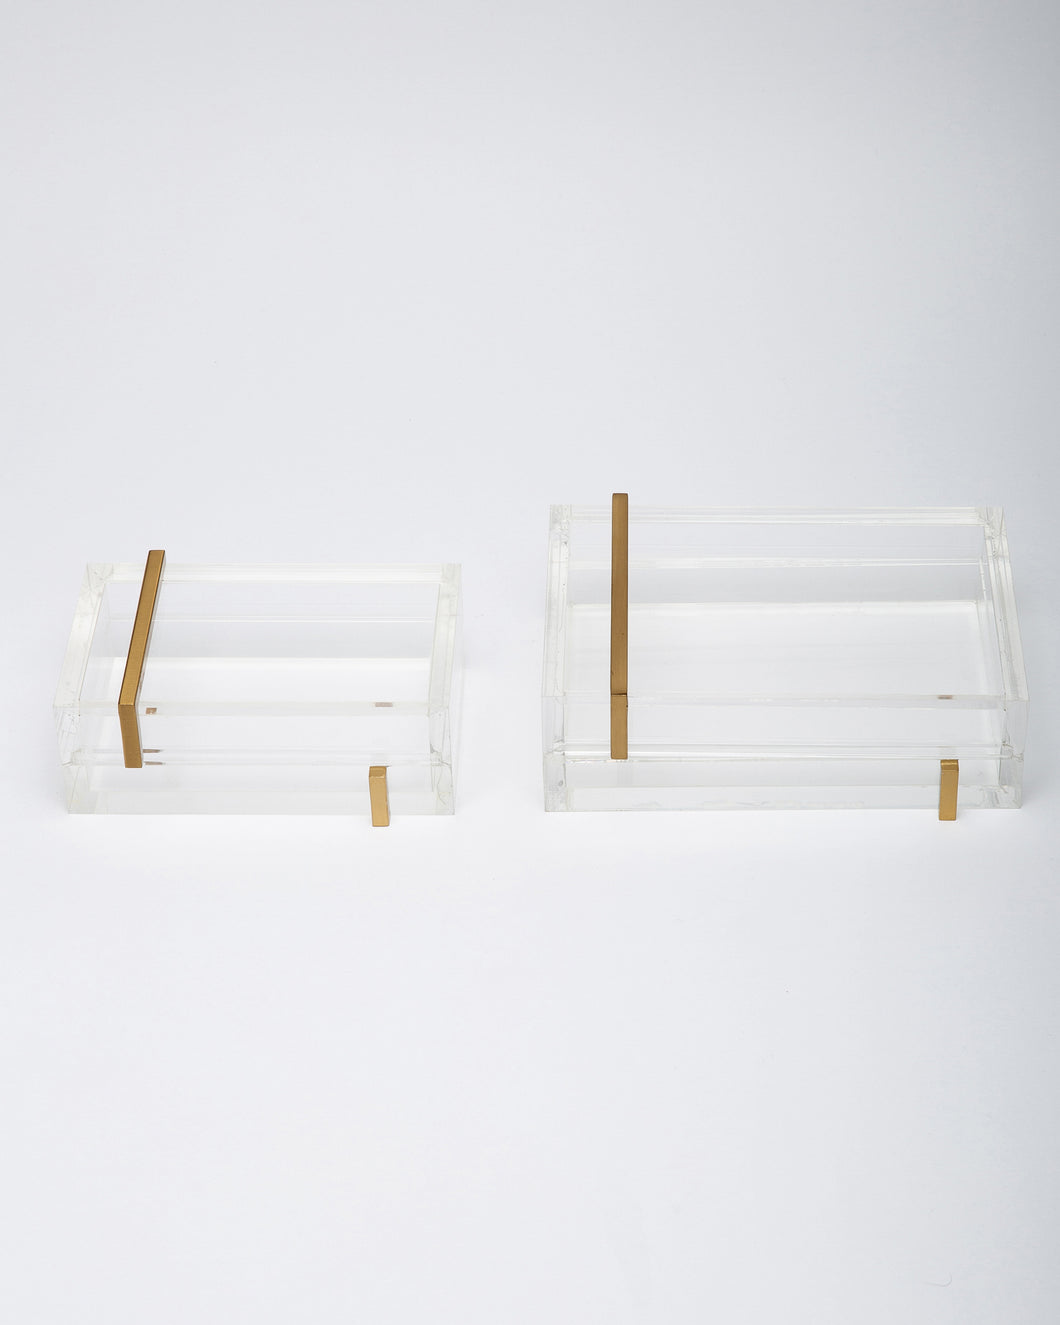 Clear Acrylic Box with Brass Strap